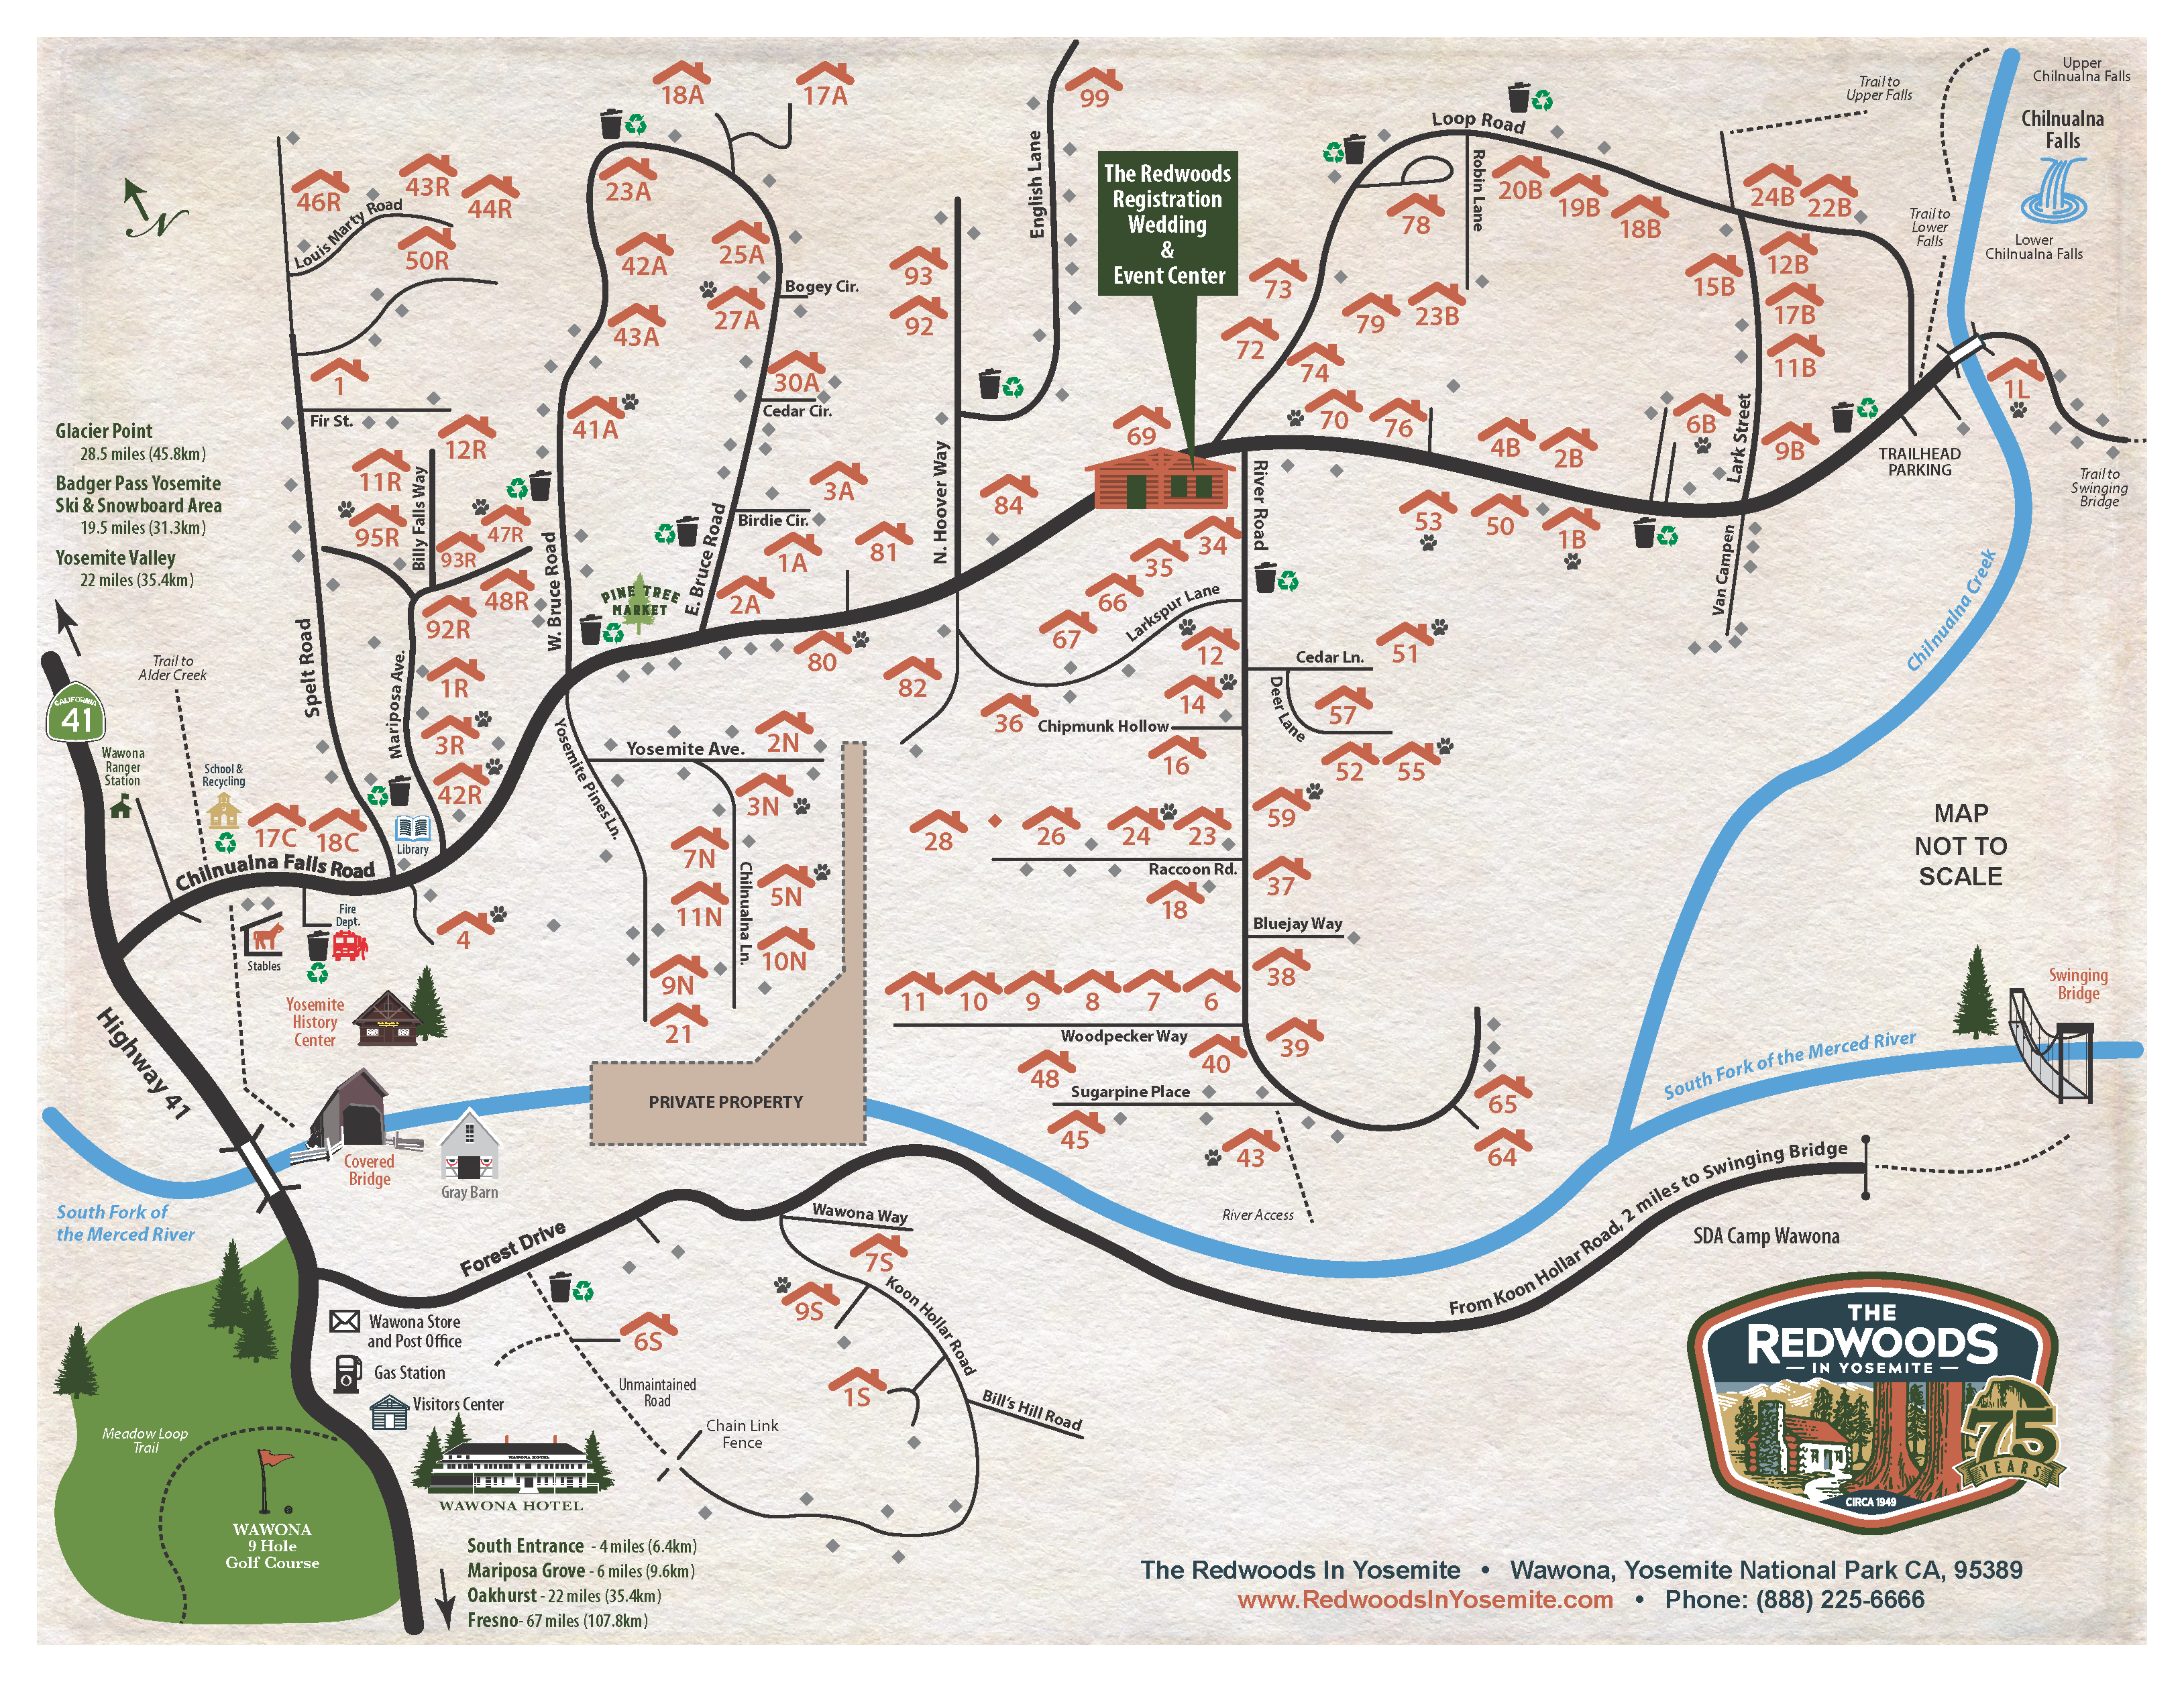 The Redwoods In Yosemite Vacation Home Rentals Map